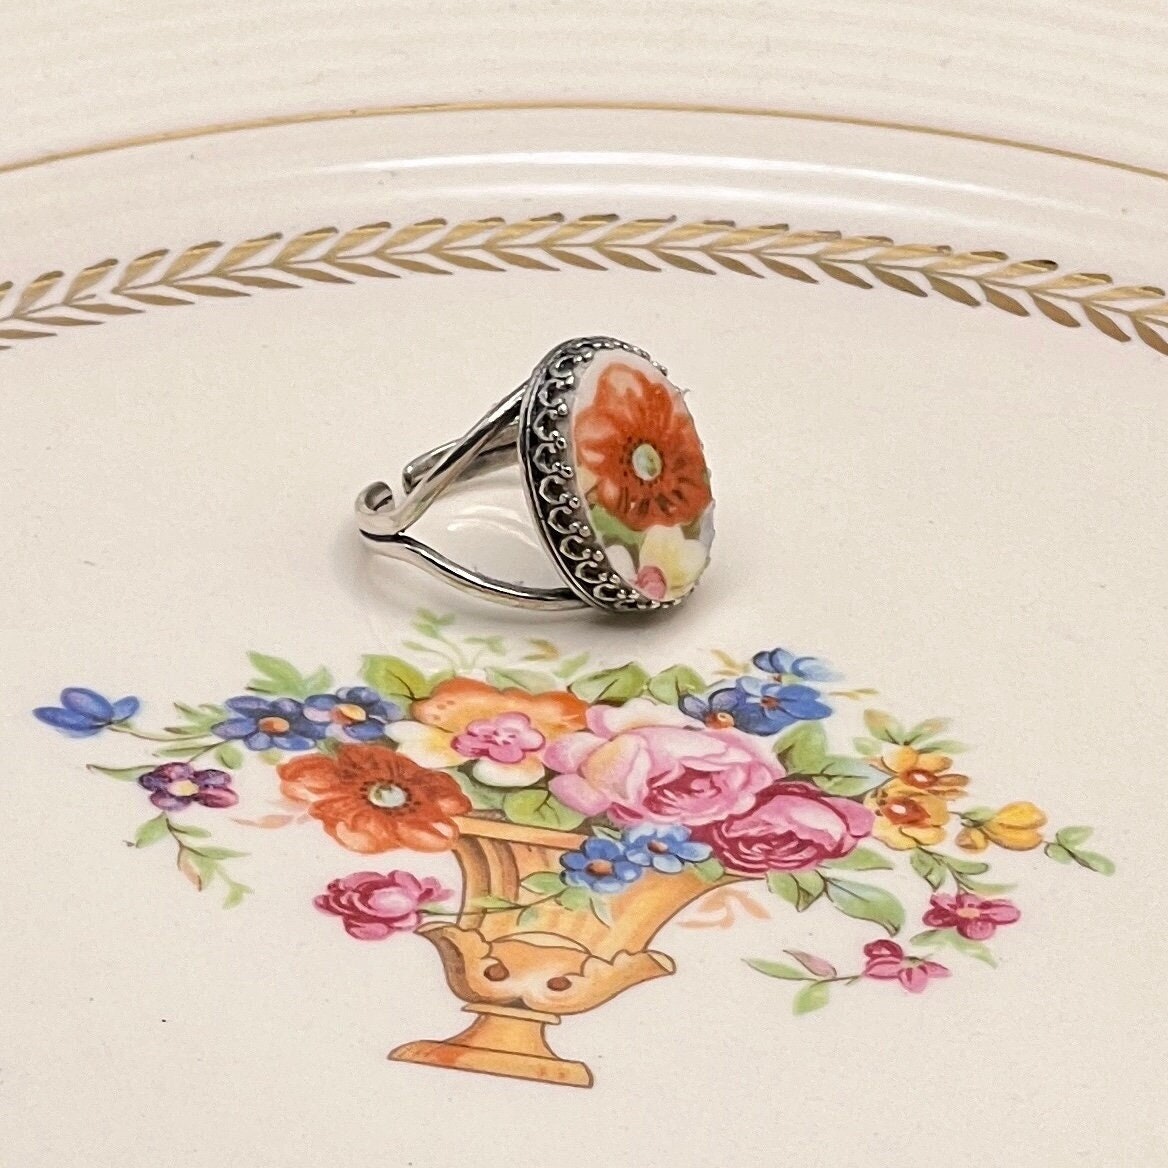 Vintage Poppy Broken China Jewelry Ring, Adjustable Sterling Silver Ring, Victorian Jewelry